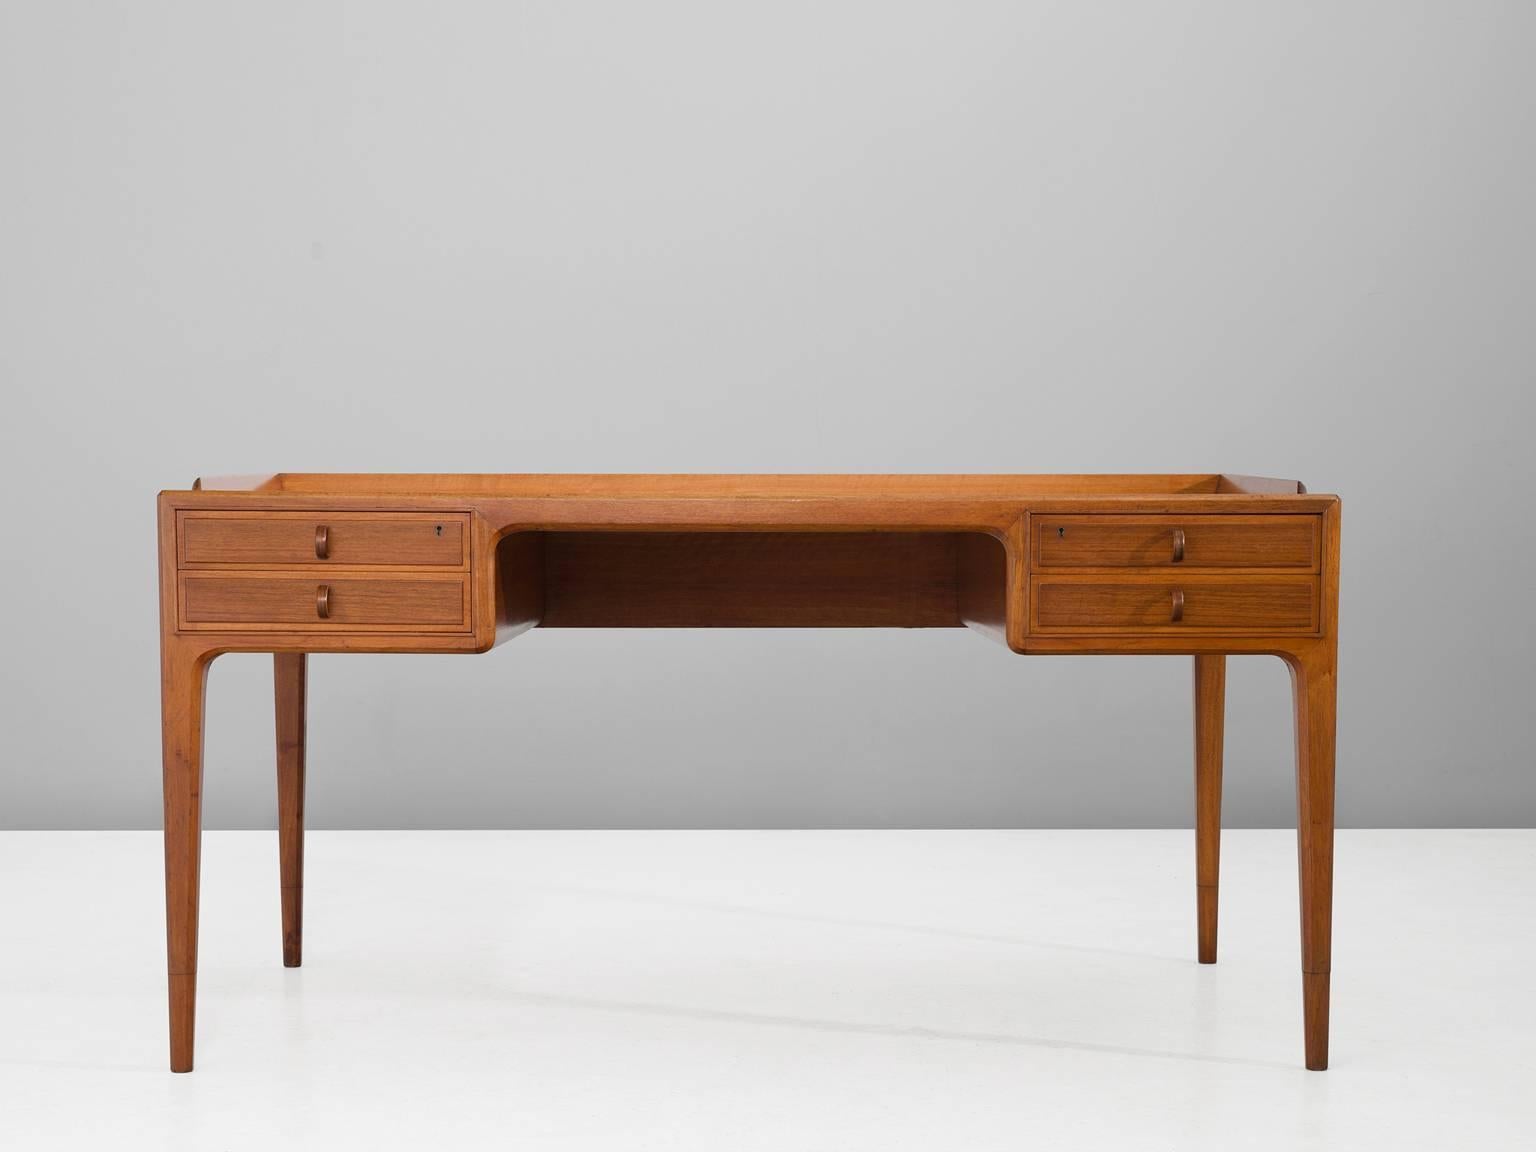 Desk in teak by Bernt Fridhagen for Bodafors, Sweden, 1961.

Elegant desk in teak. The back is also executed in teak, which makes it a highly versatile item which could be placed freely in the room. Nice open character due the high legs. Al